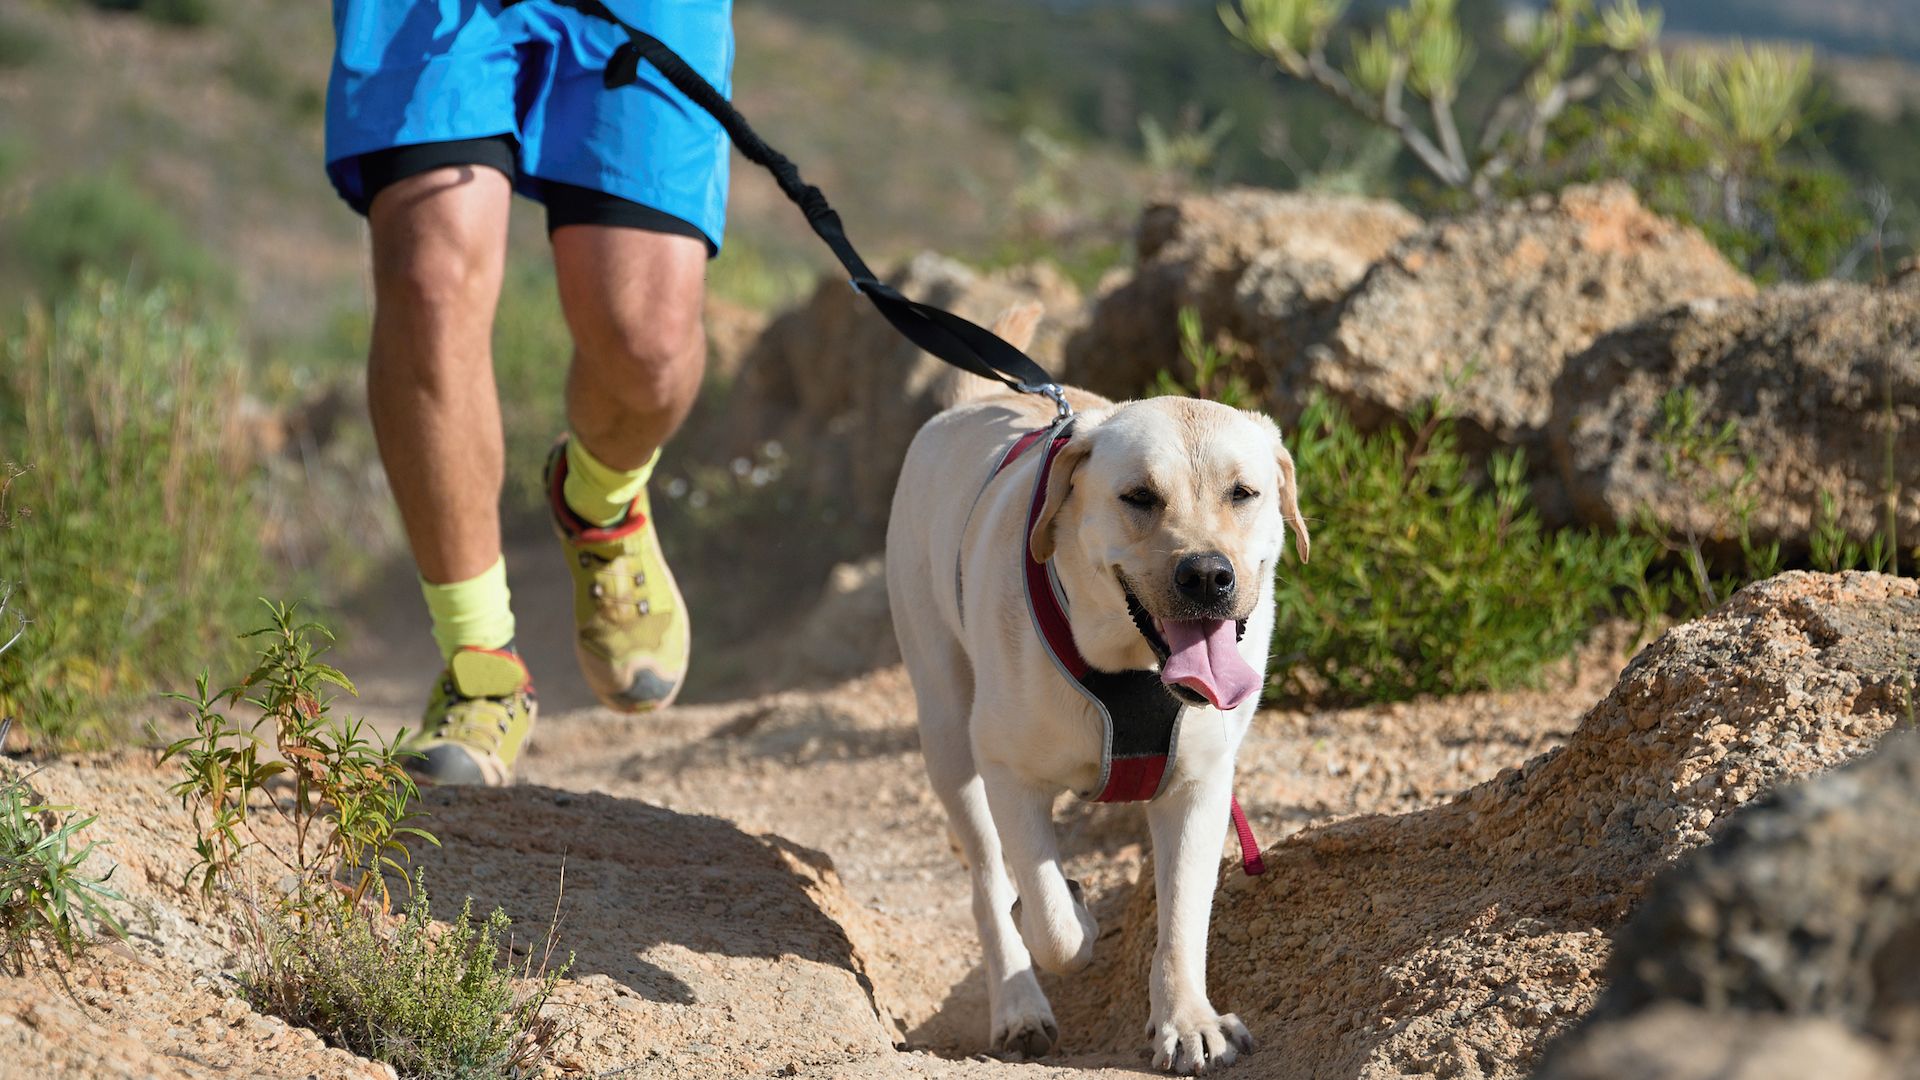 <p>                     Everyone knows a dog needs daily exercise, but so do you! A <a href="https://www.nature.com/articles/s41598-019-41254-6" rel="nofollow">British scientific report </a>found that dog owners were almost four times more likely to get the recommended amount of physical activity than non-dog owners.                   </p>                                      <p>                     Get involved in any kind of jogging with your dog, and you will burn even more calories.                   </p>